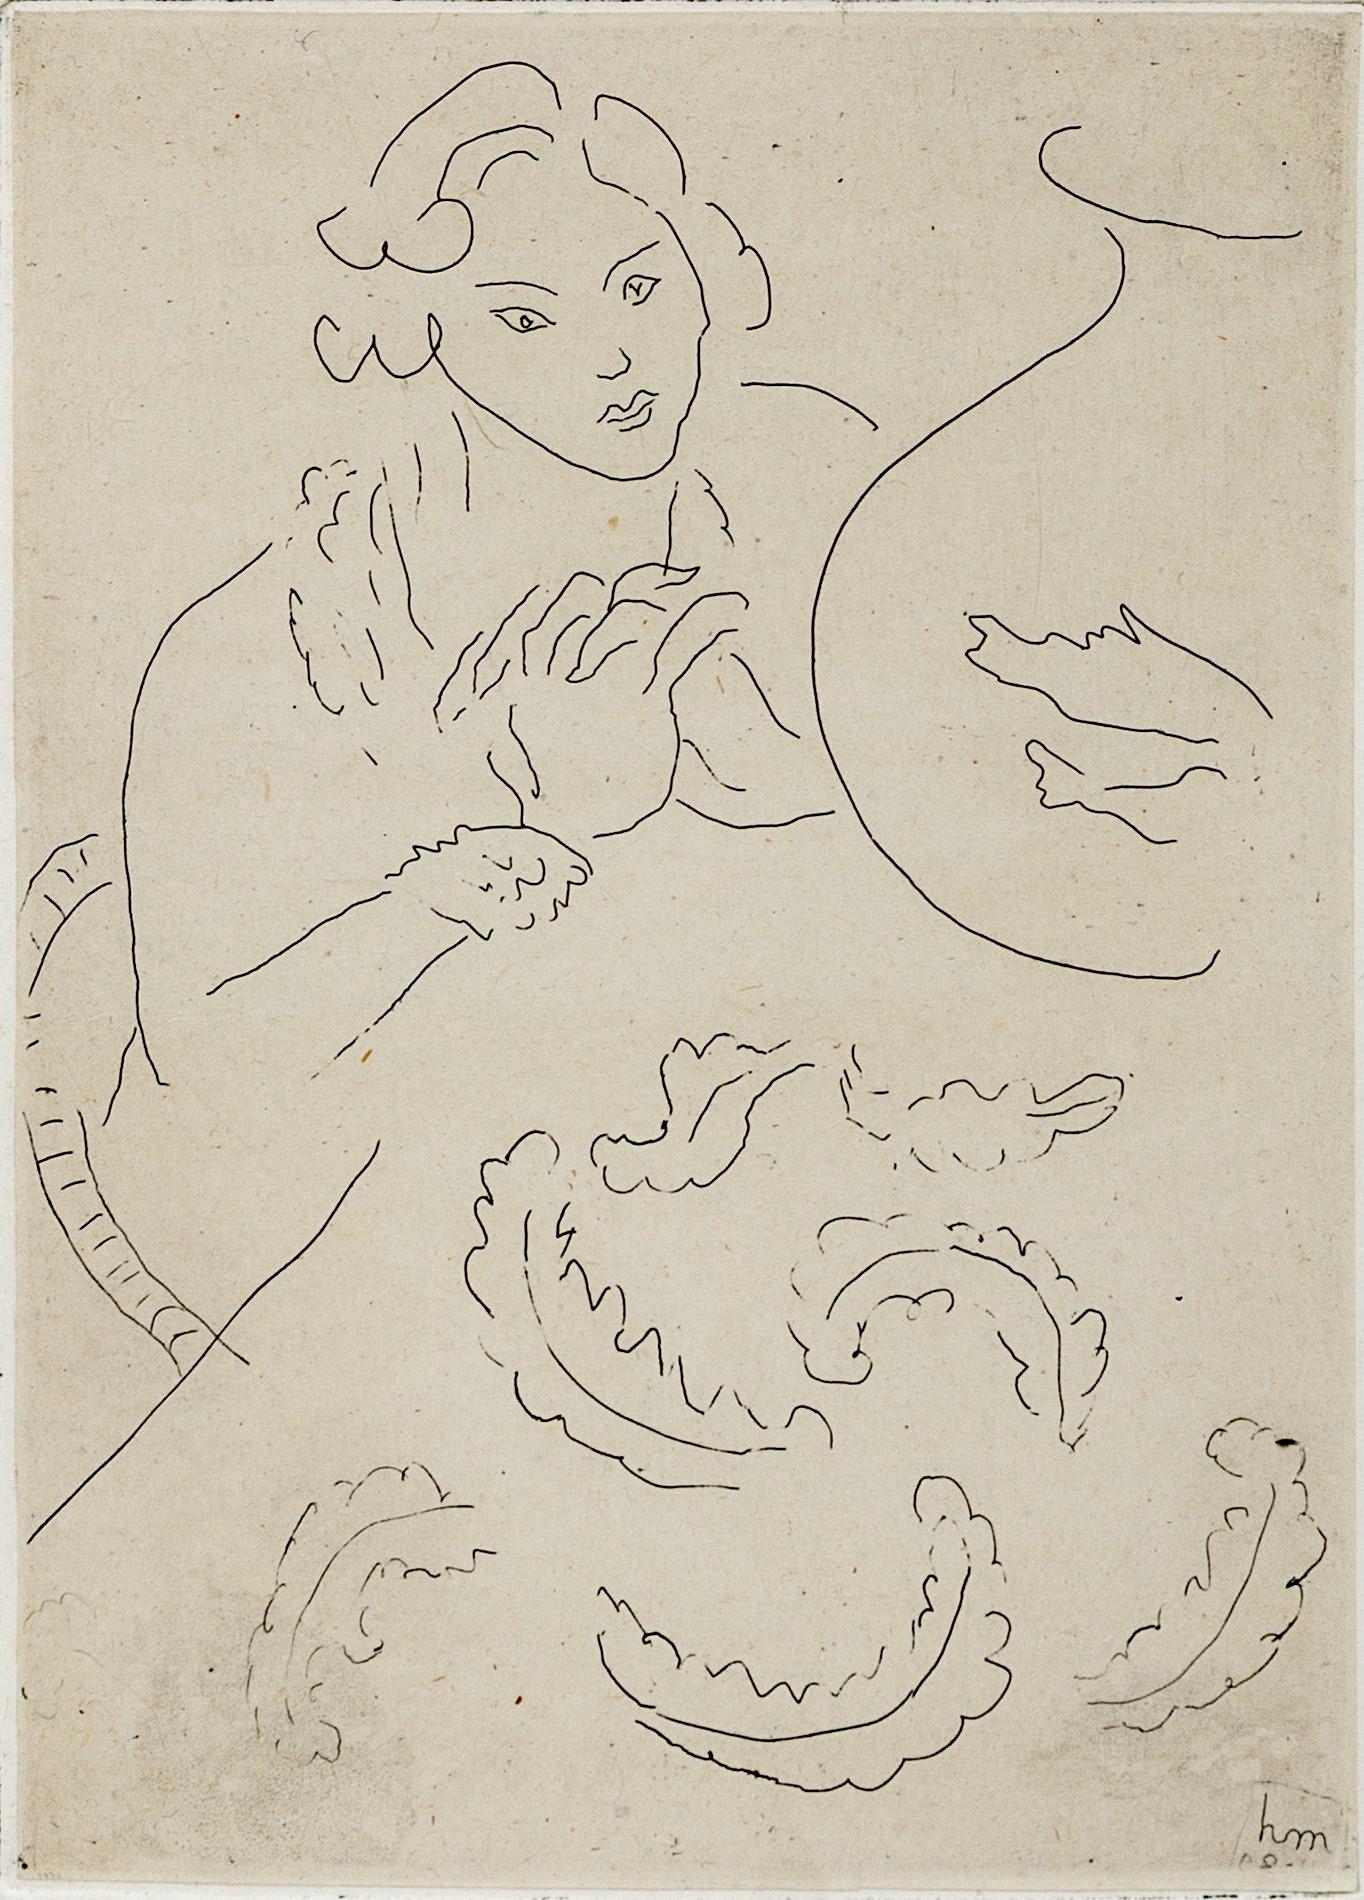 Henri Matisse Figurative Print - Figure with Joined Hands and Persian Cloth - Original etching - Hand-signed